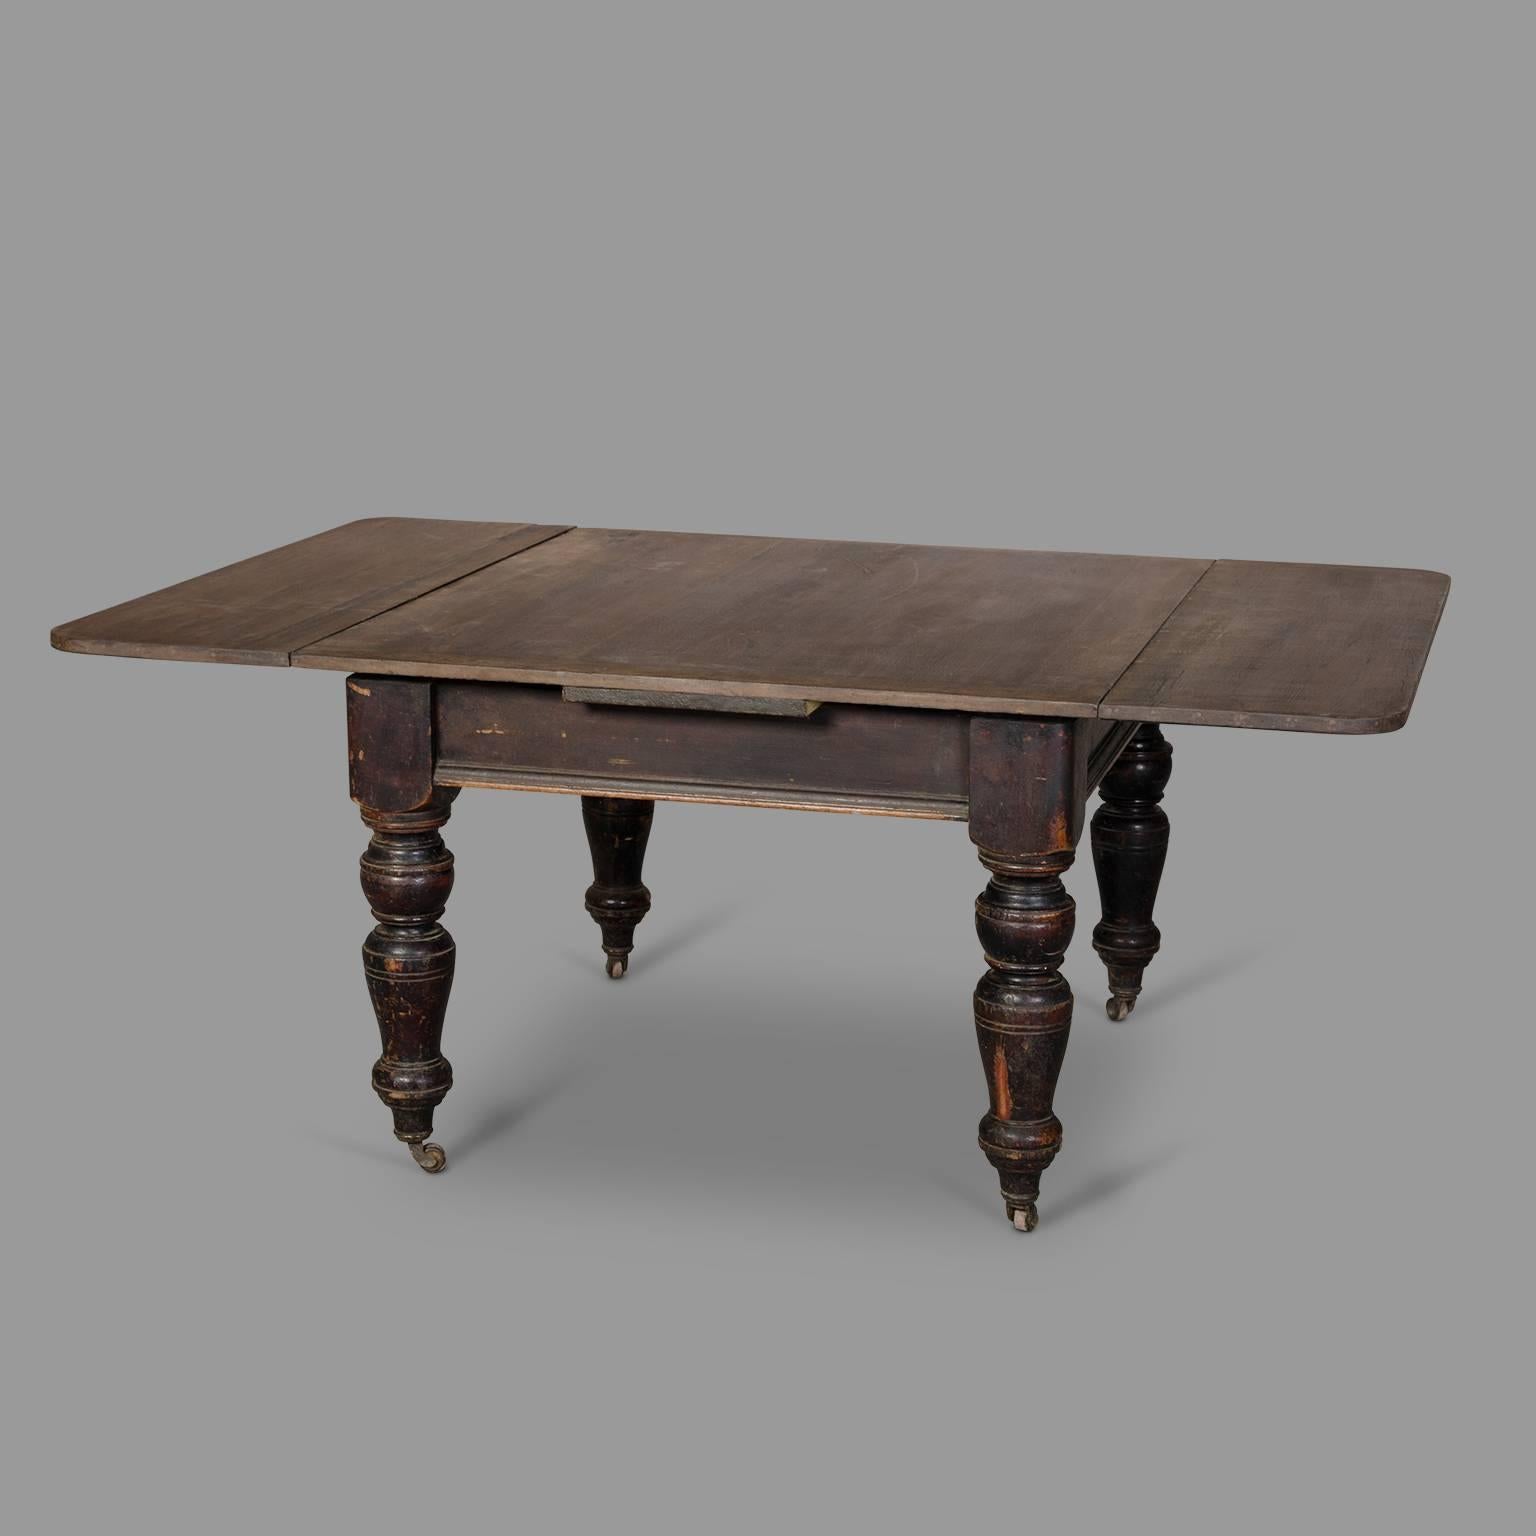 Popular work, Flanders between 1900 and 1930. Beautiful proportions for this table that combines solid turned wood feet and a top with a clever extension system. Beautiful waxed wood patina and remains of blackened varnish make it a very sculptural